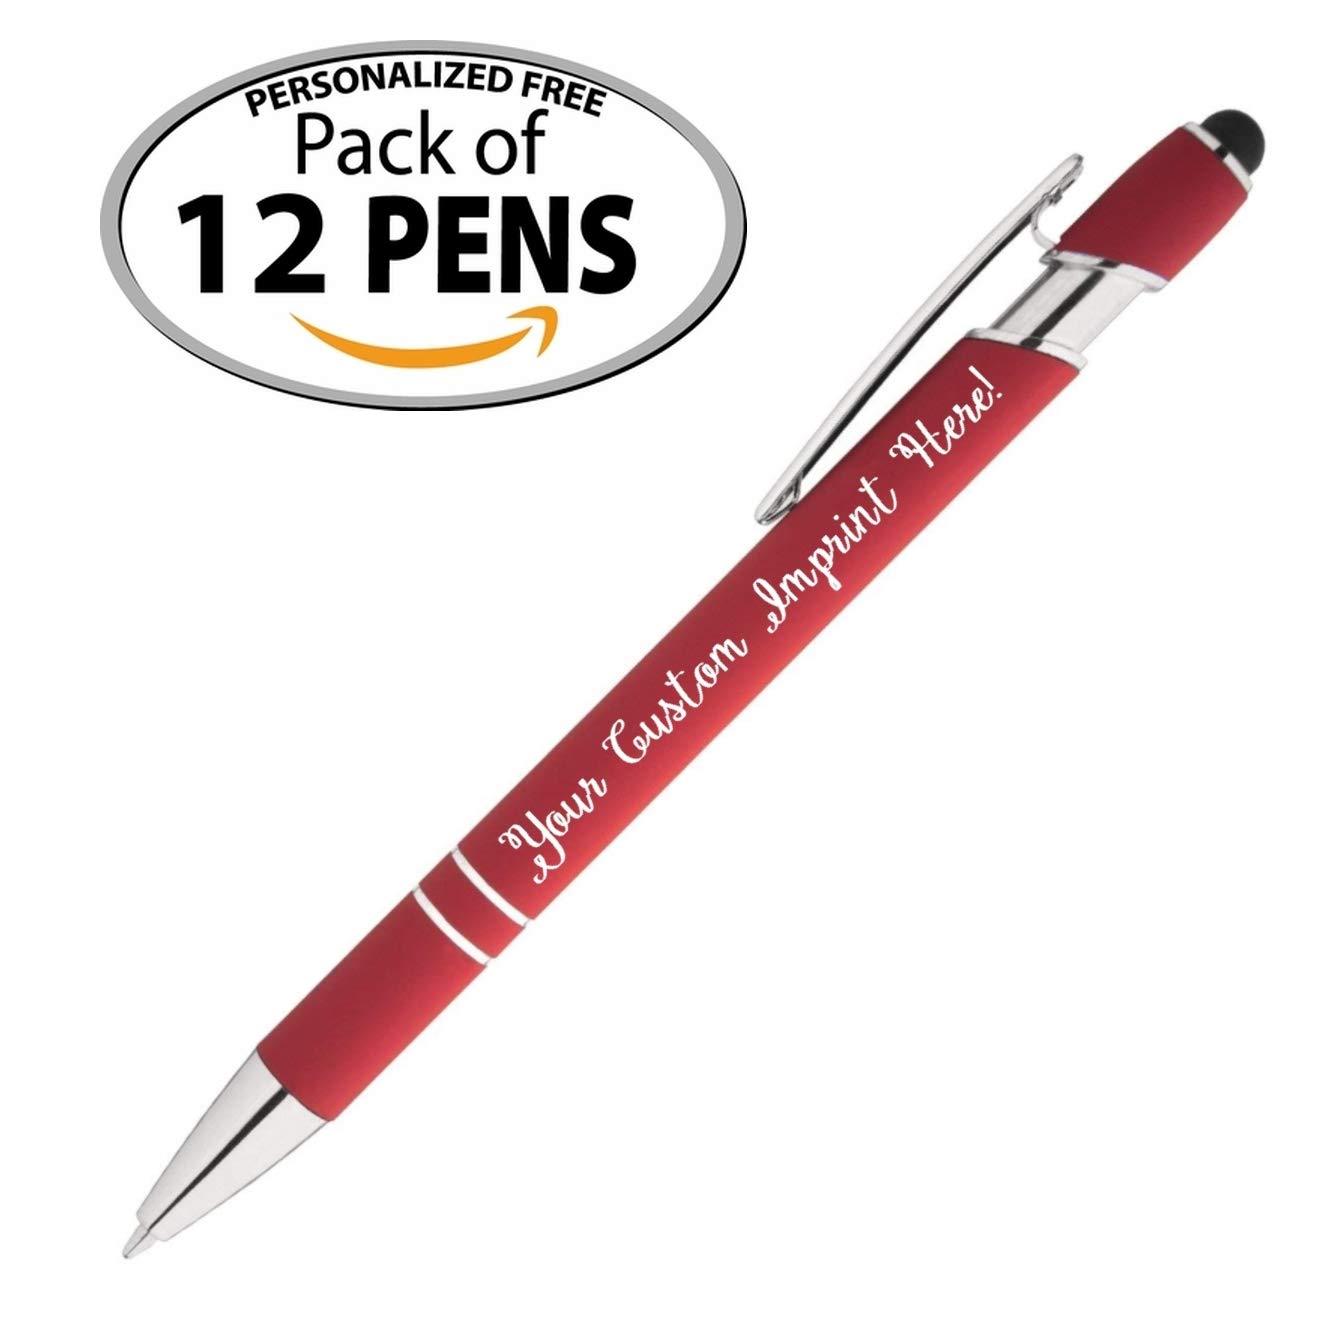 Full Color Imprint offered on Rainbow Rubberized Soft Touch Ballpoint Pen Stylus is a stylish, premium metal pen, black ink, medium point. Box of 12 - Personalized with your custom text or logo - image 3 of 6